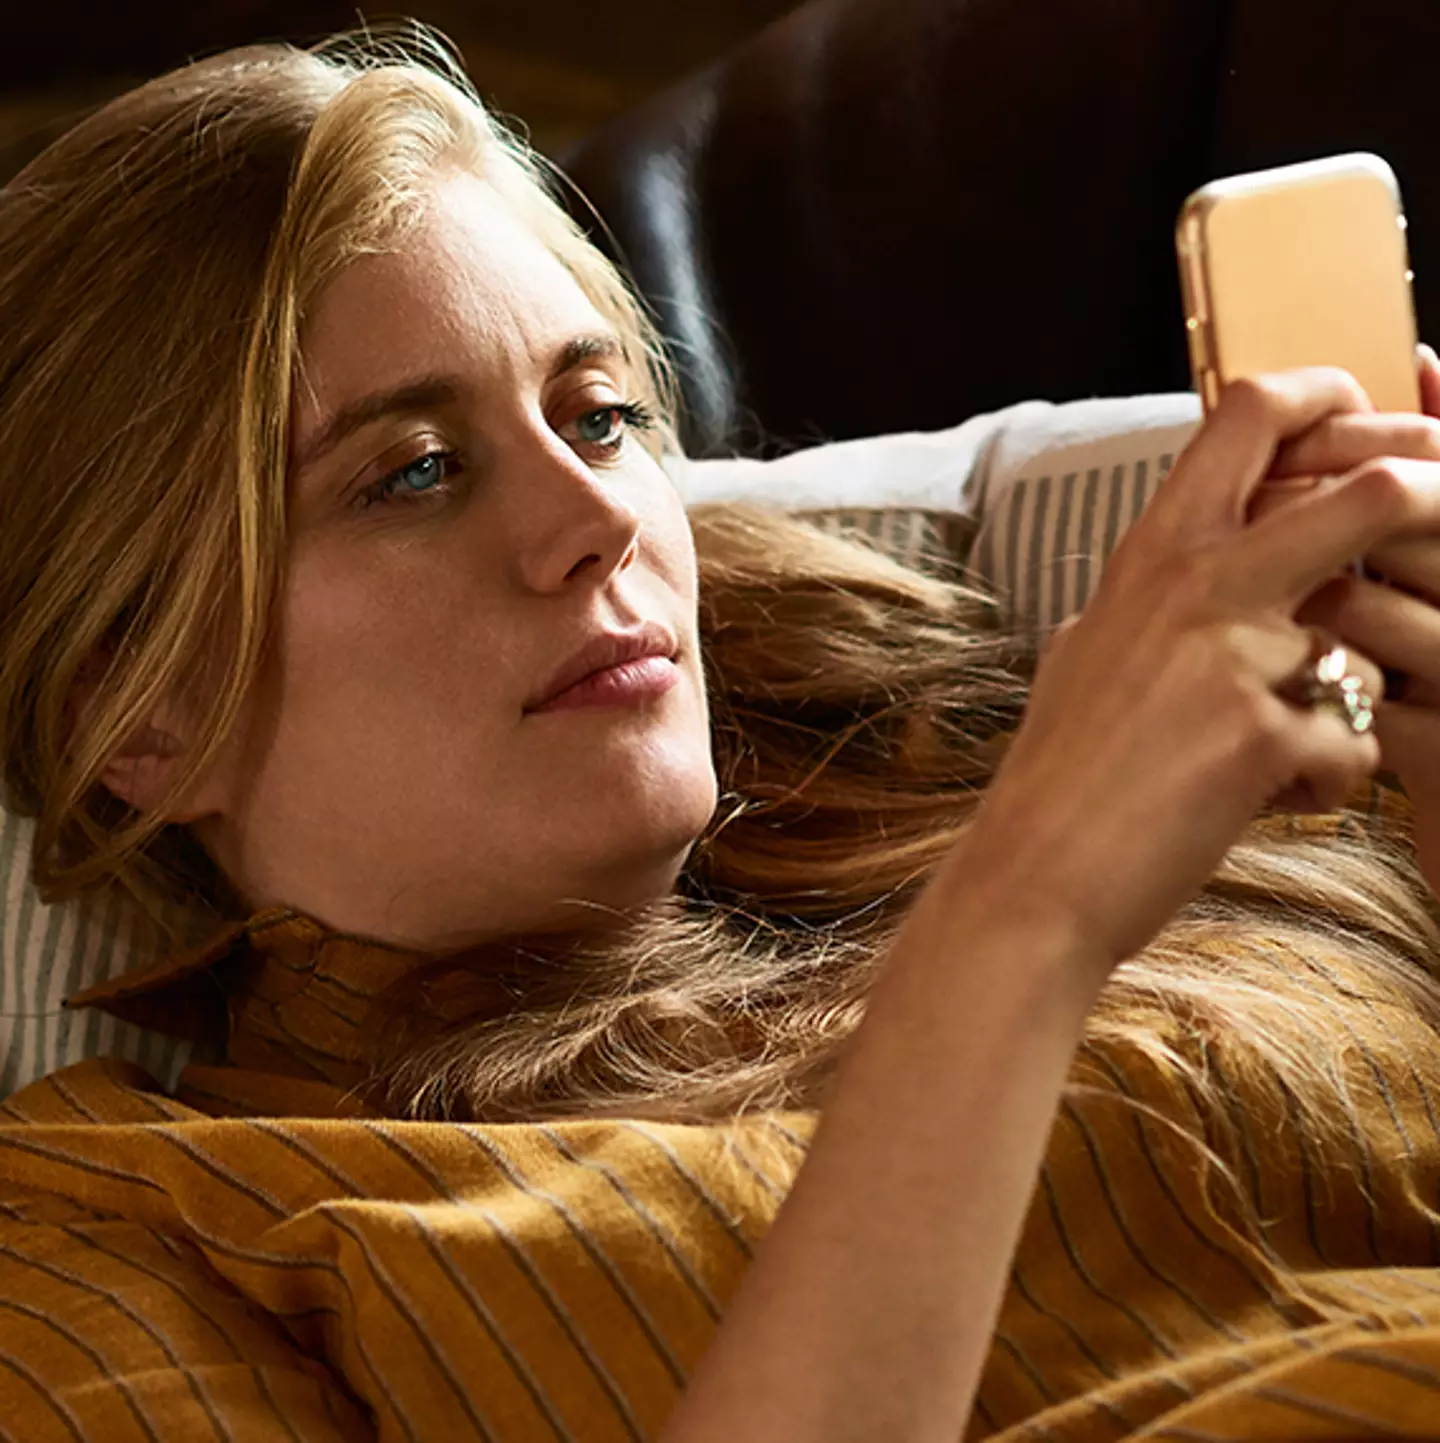 Psychologist reveals seven texting habits of a narcissist to look out for